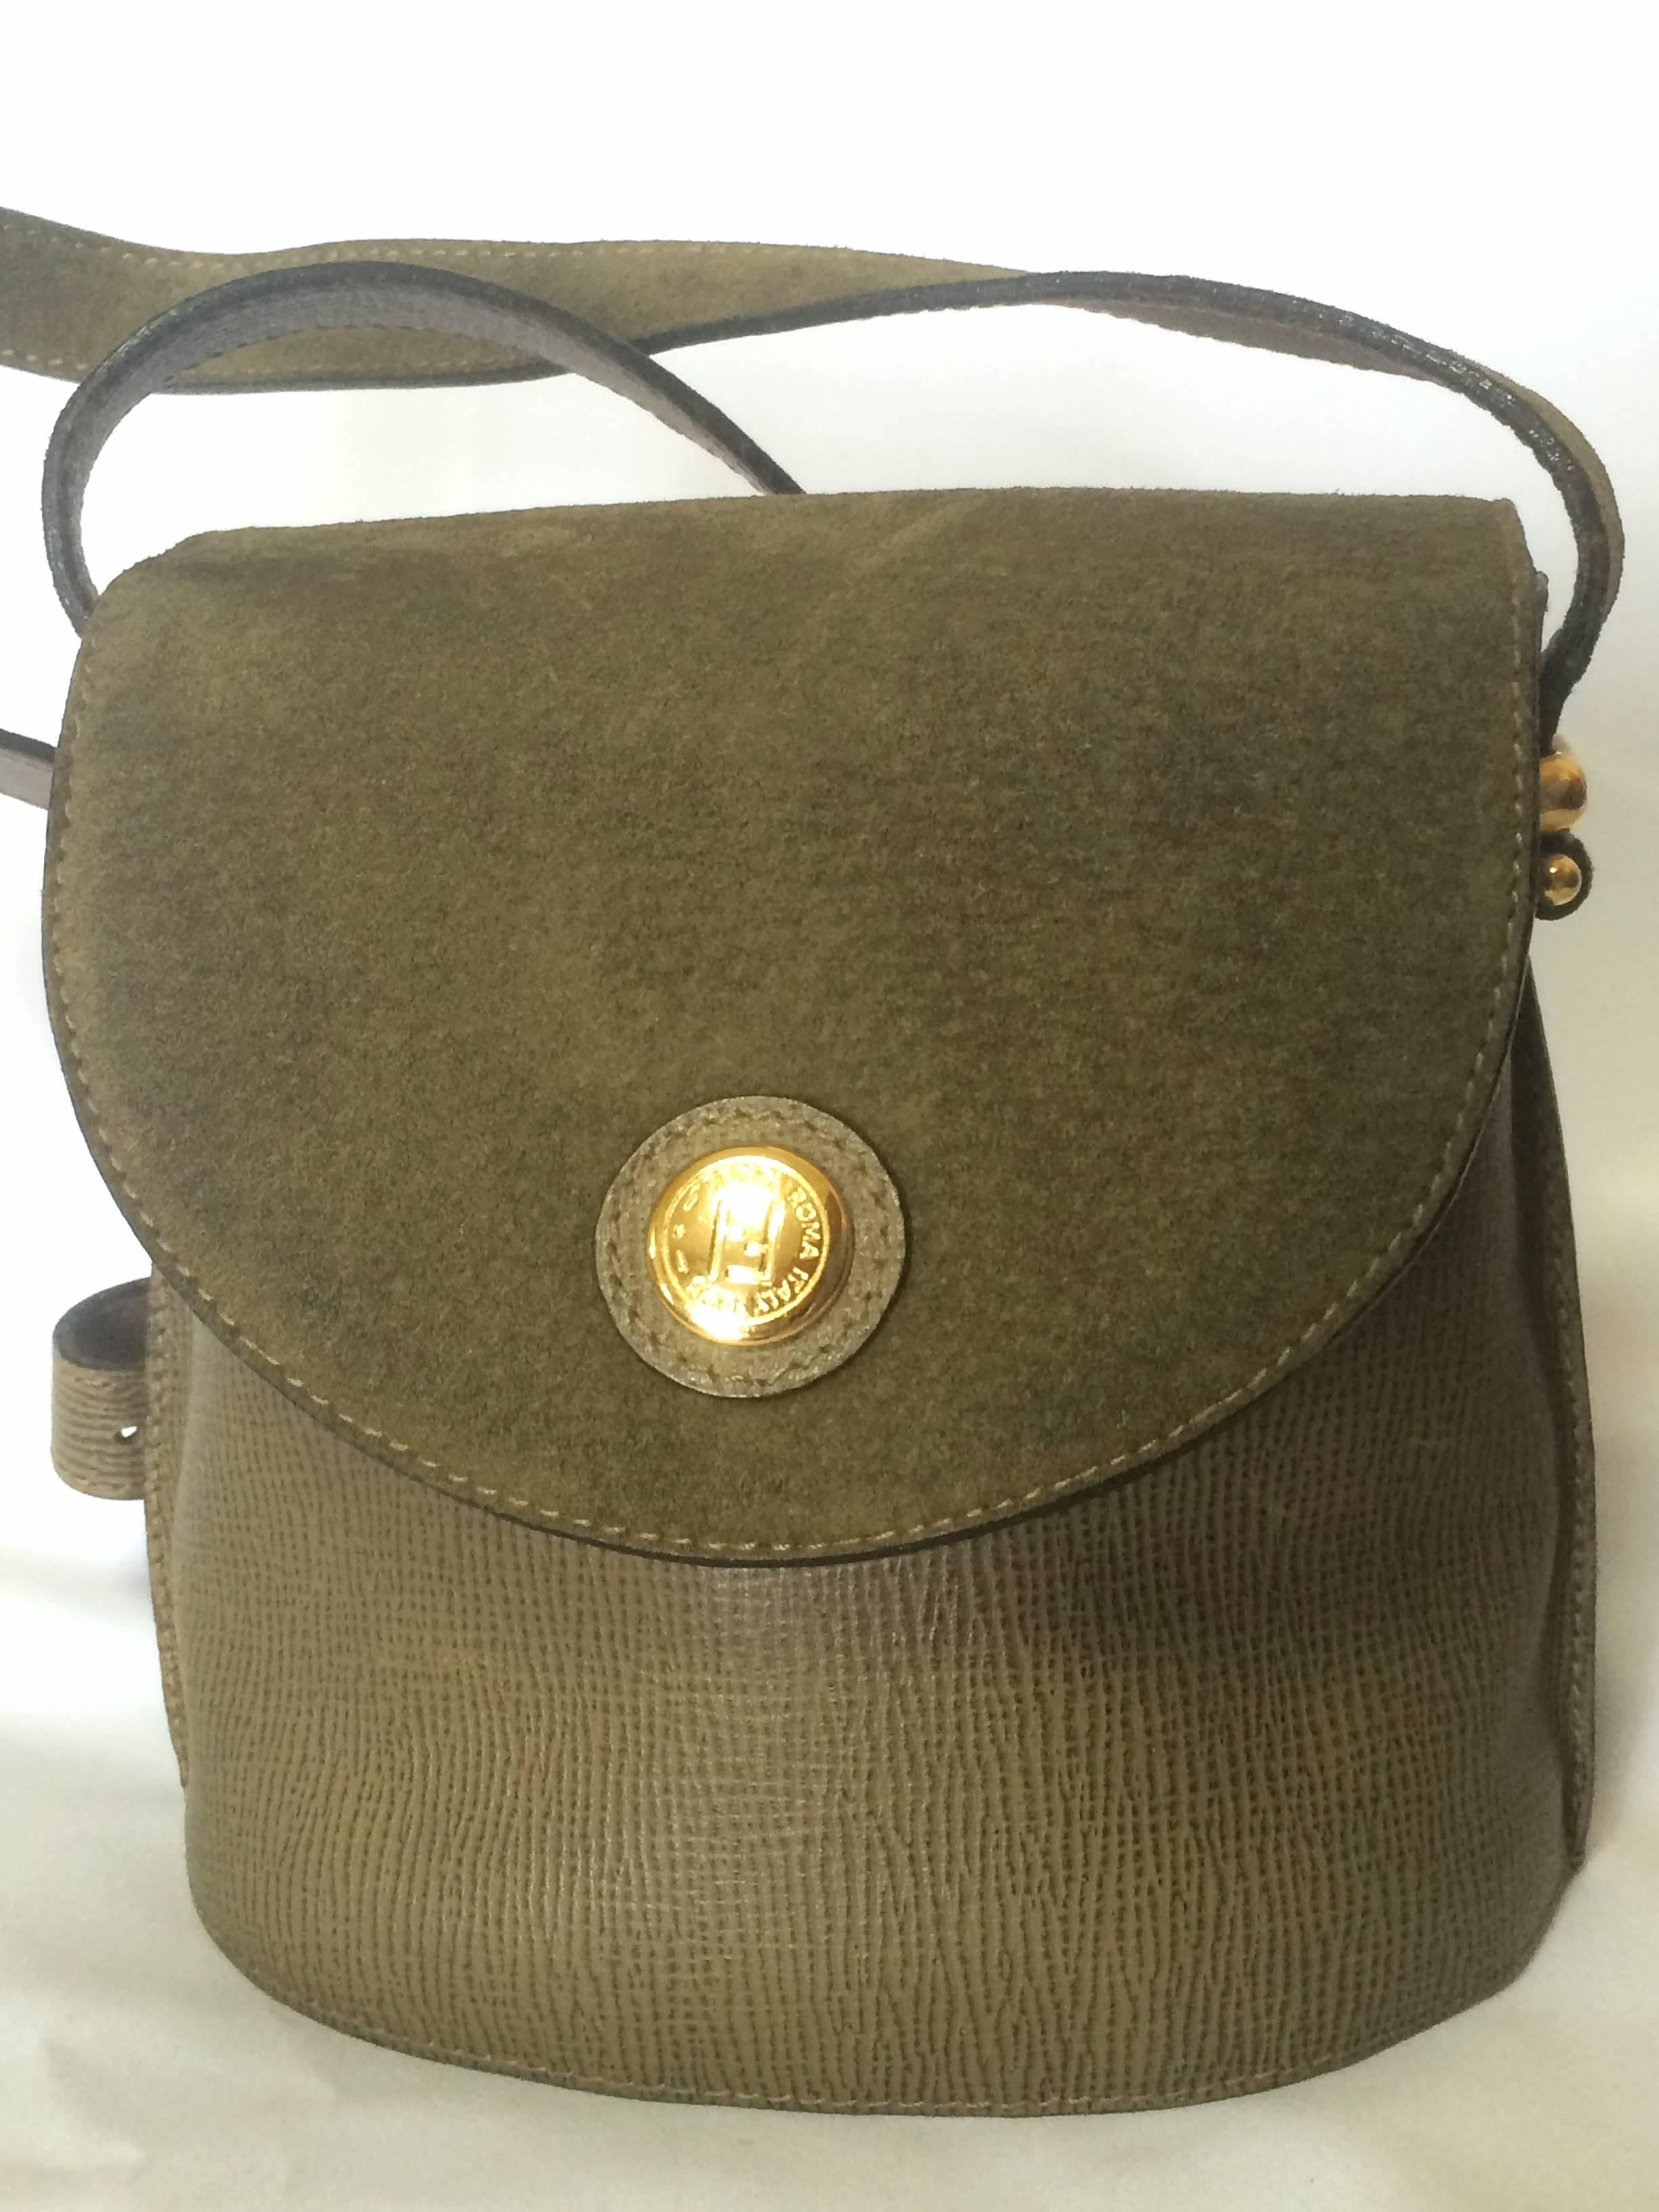 1990s.Vintage FENDI khaki green grained and pigskin suede leather combination mini shoulder bag with golden round logo at front.

 Introducing another vintage leather bag from FENDI back in the 90's.

Beautiful olive green leather combination